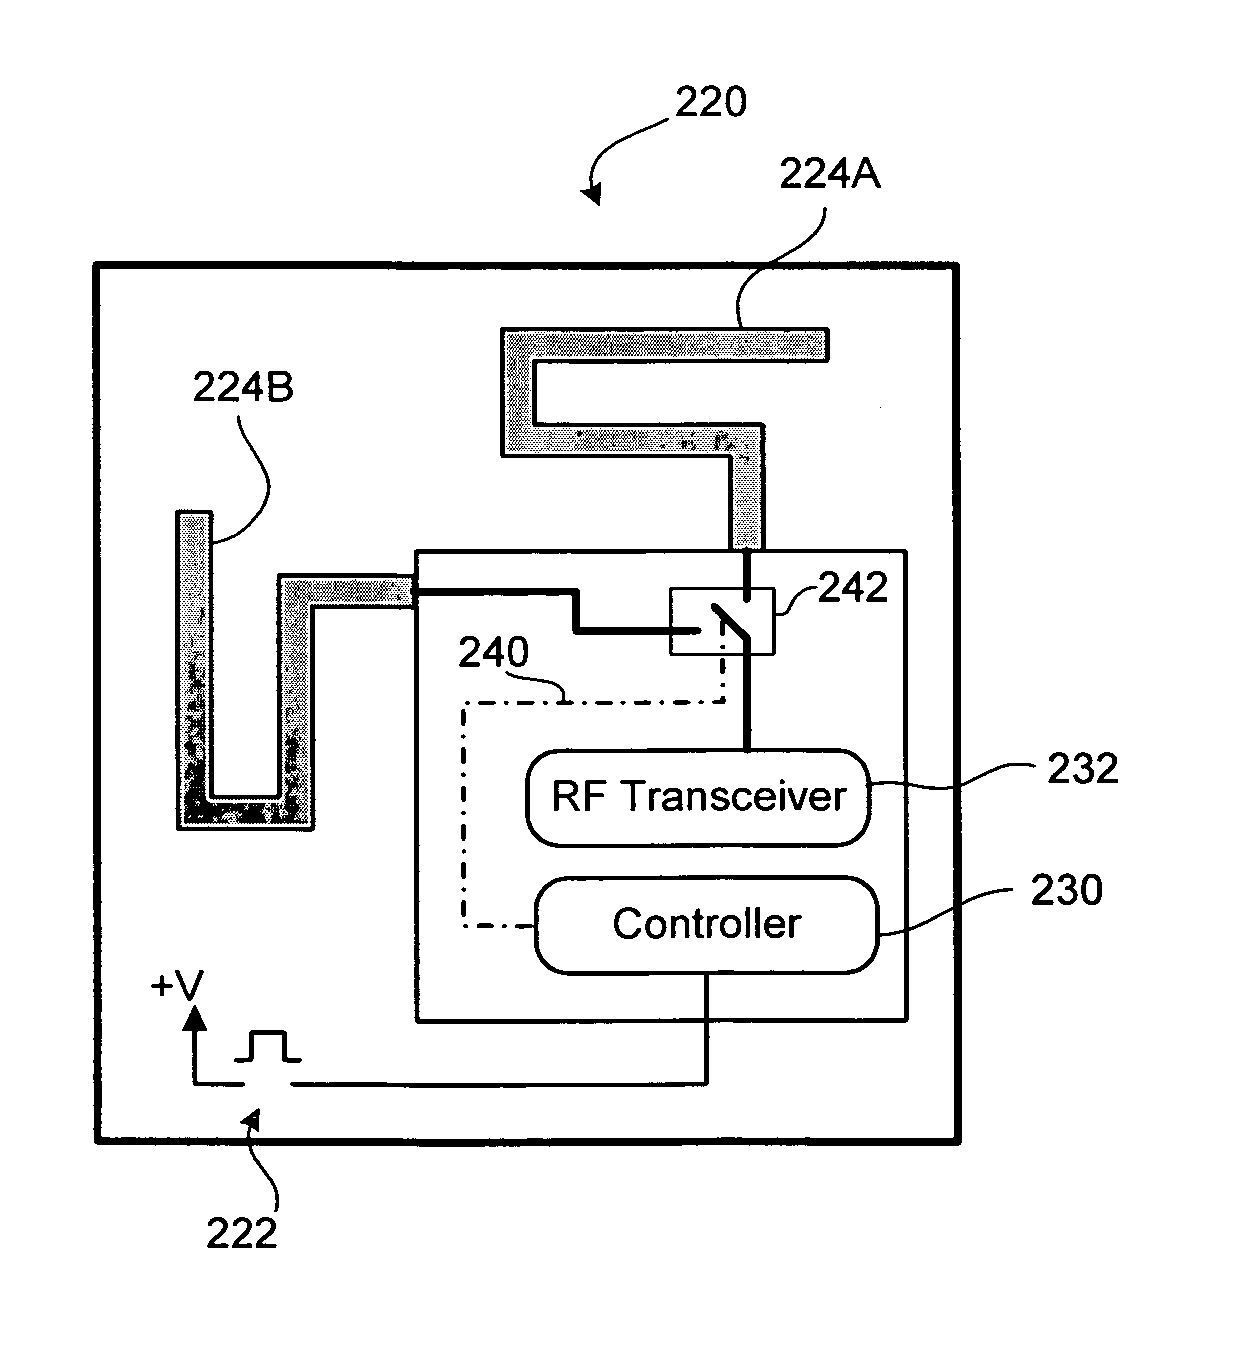 Method of enabling two-state operation of electronic toll collection system